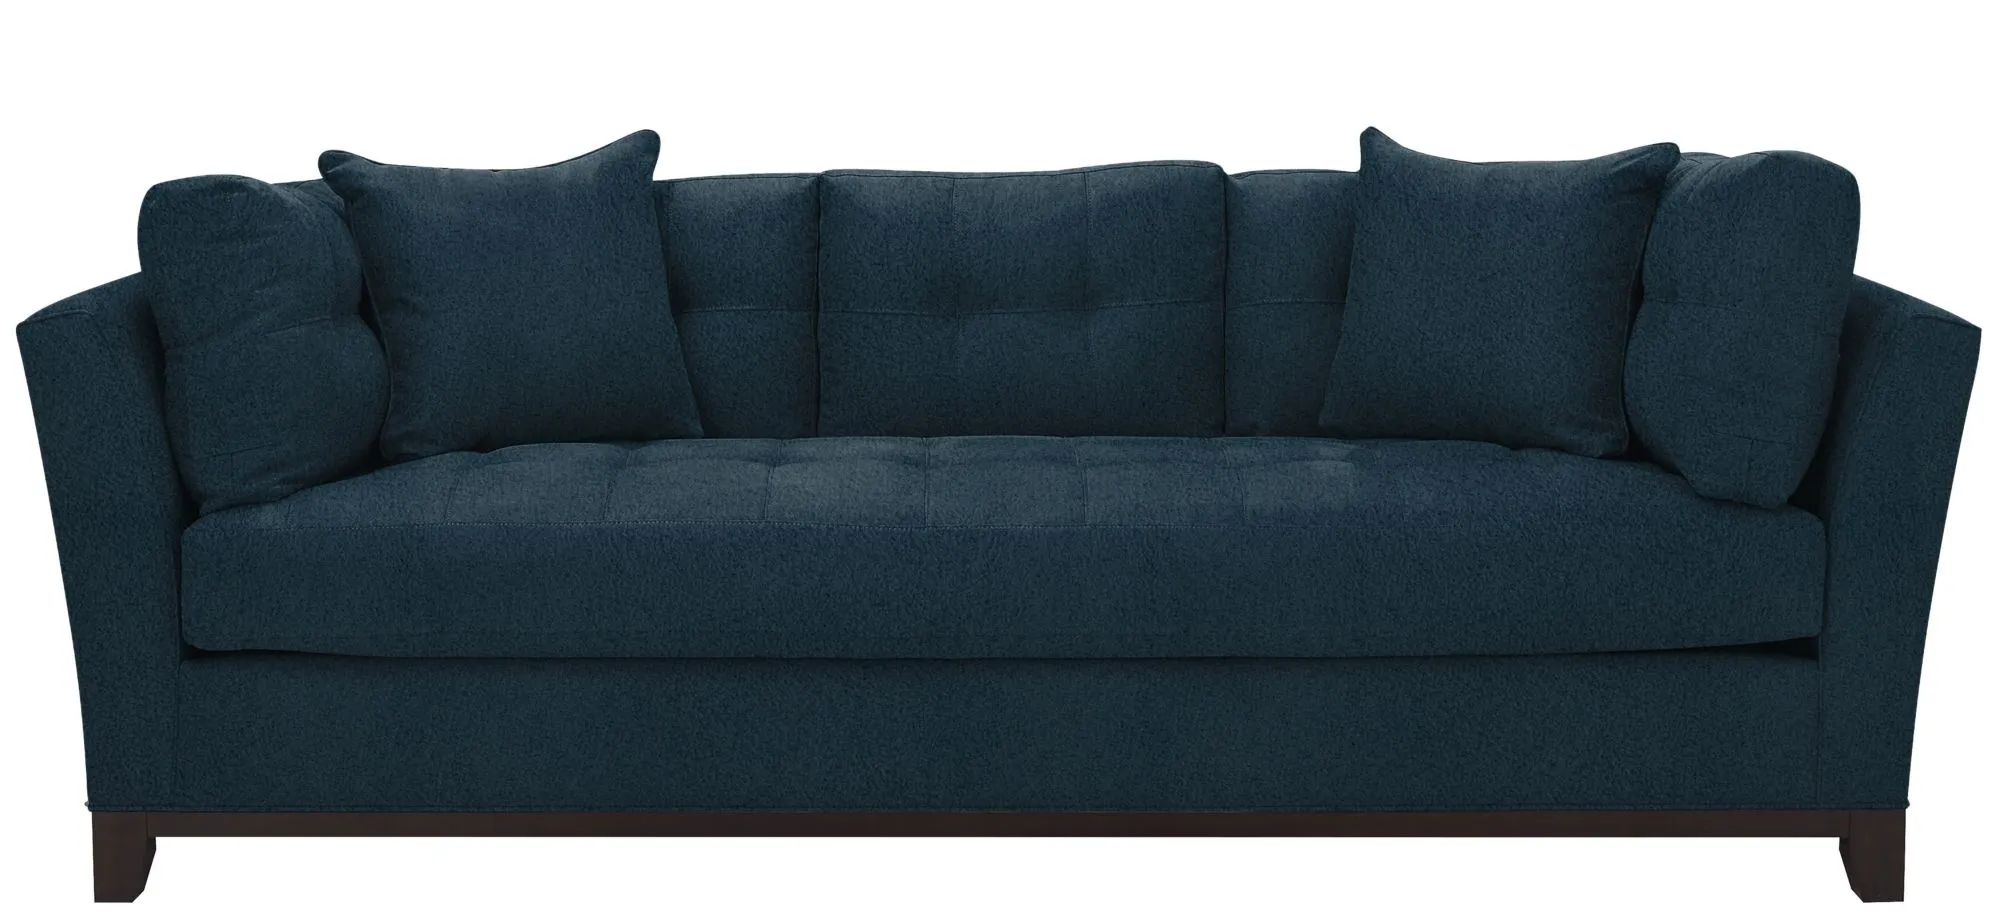 Cityscape Sofa in Suede So Soft Midnight by H.M. Richards